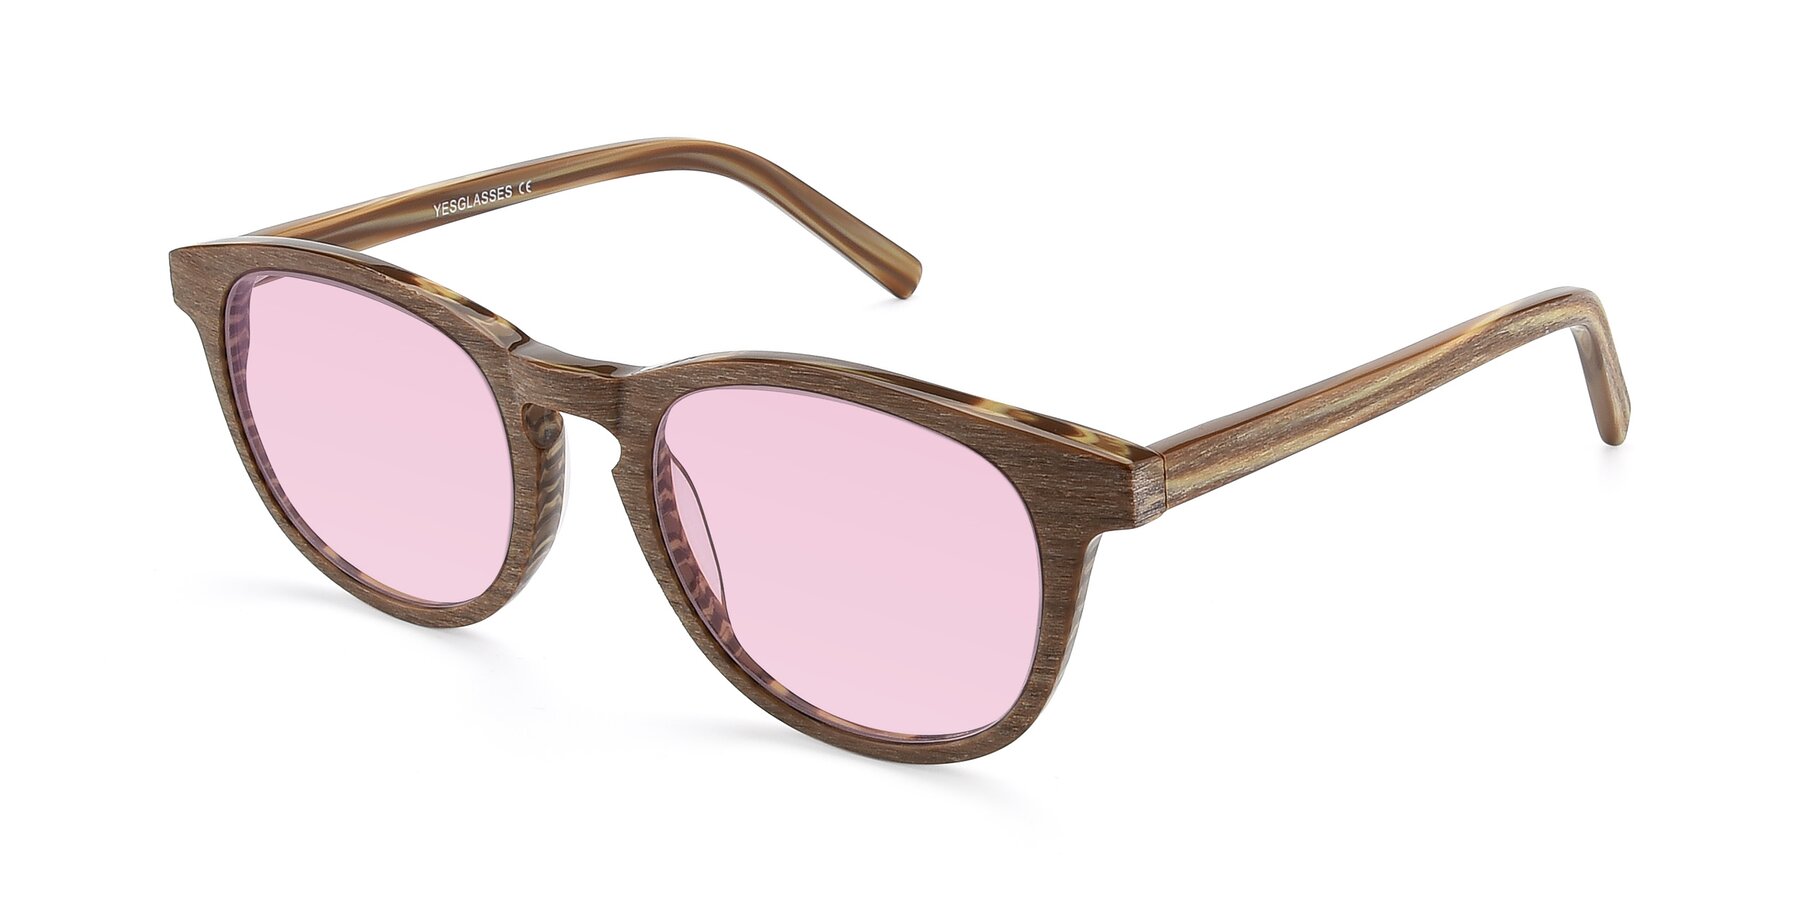 Angle of SR6044 in Brown-Wooden with Light Pink Tinted Lenses